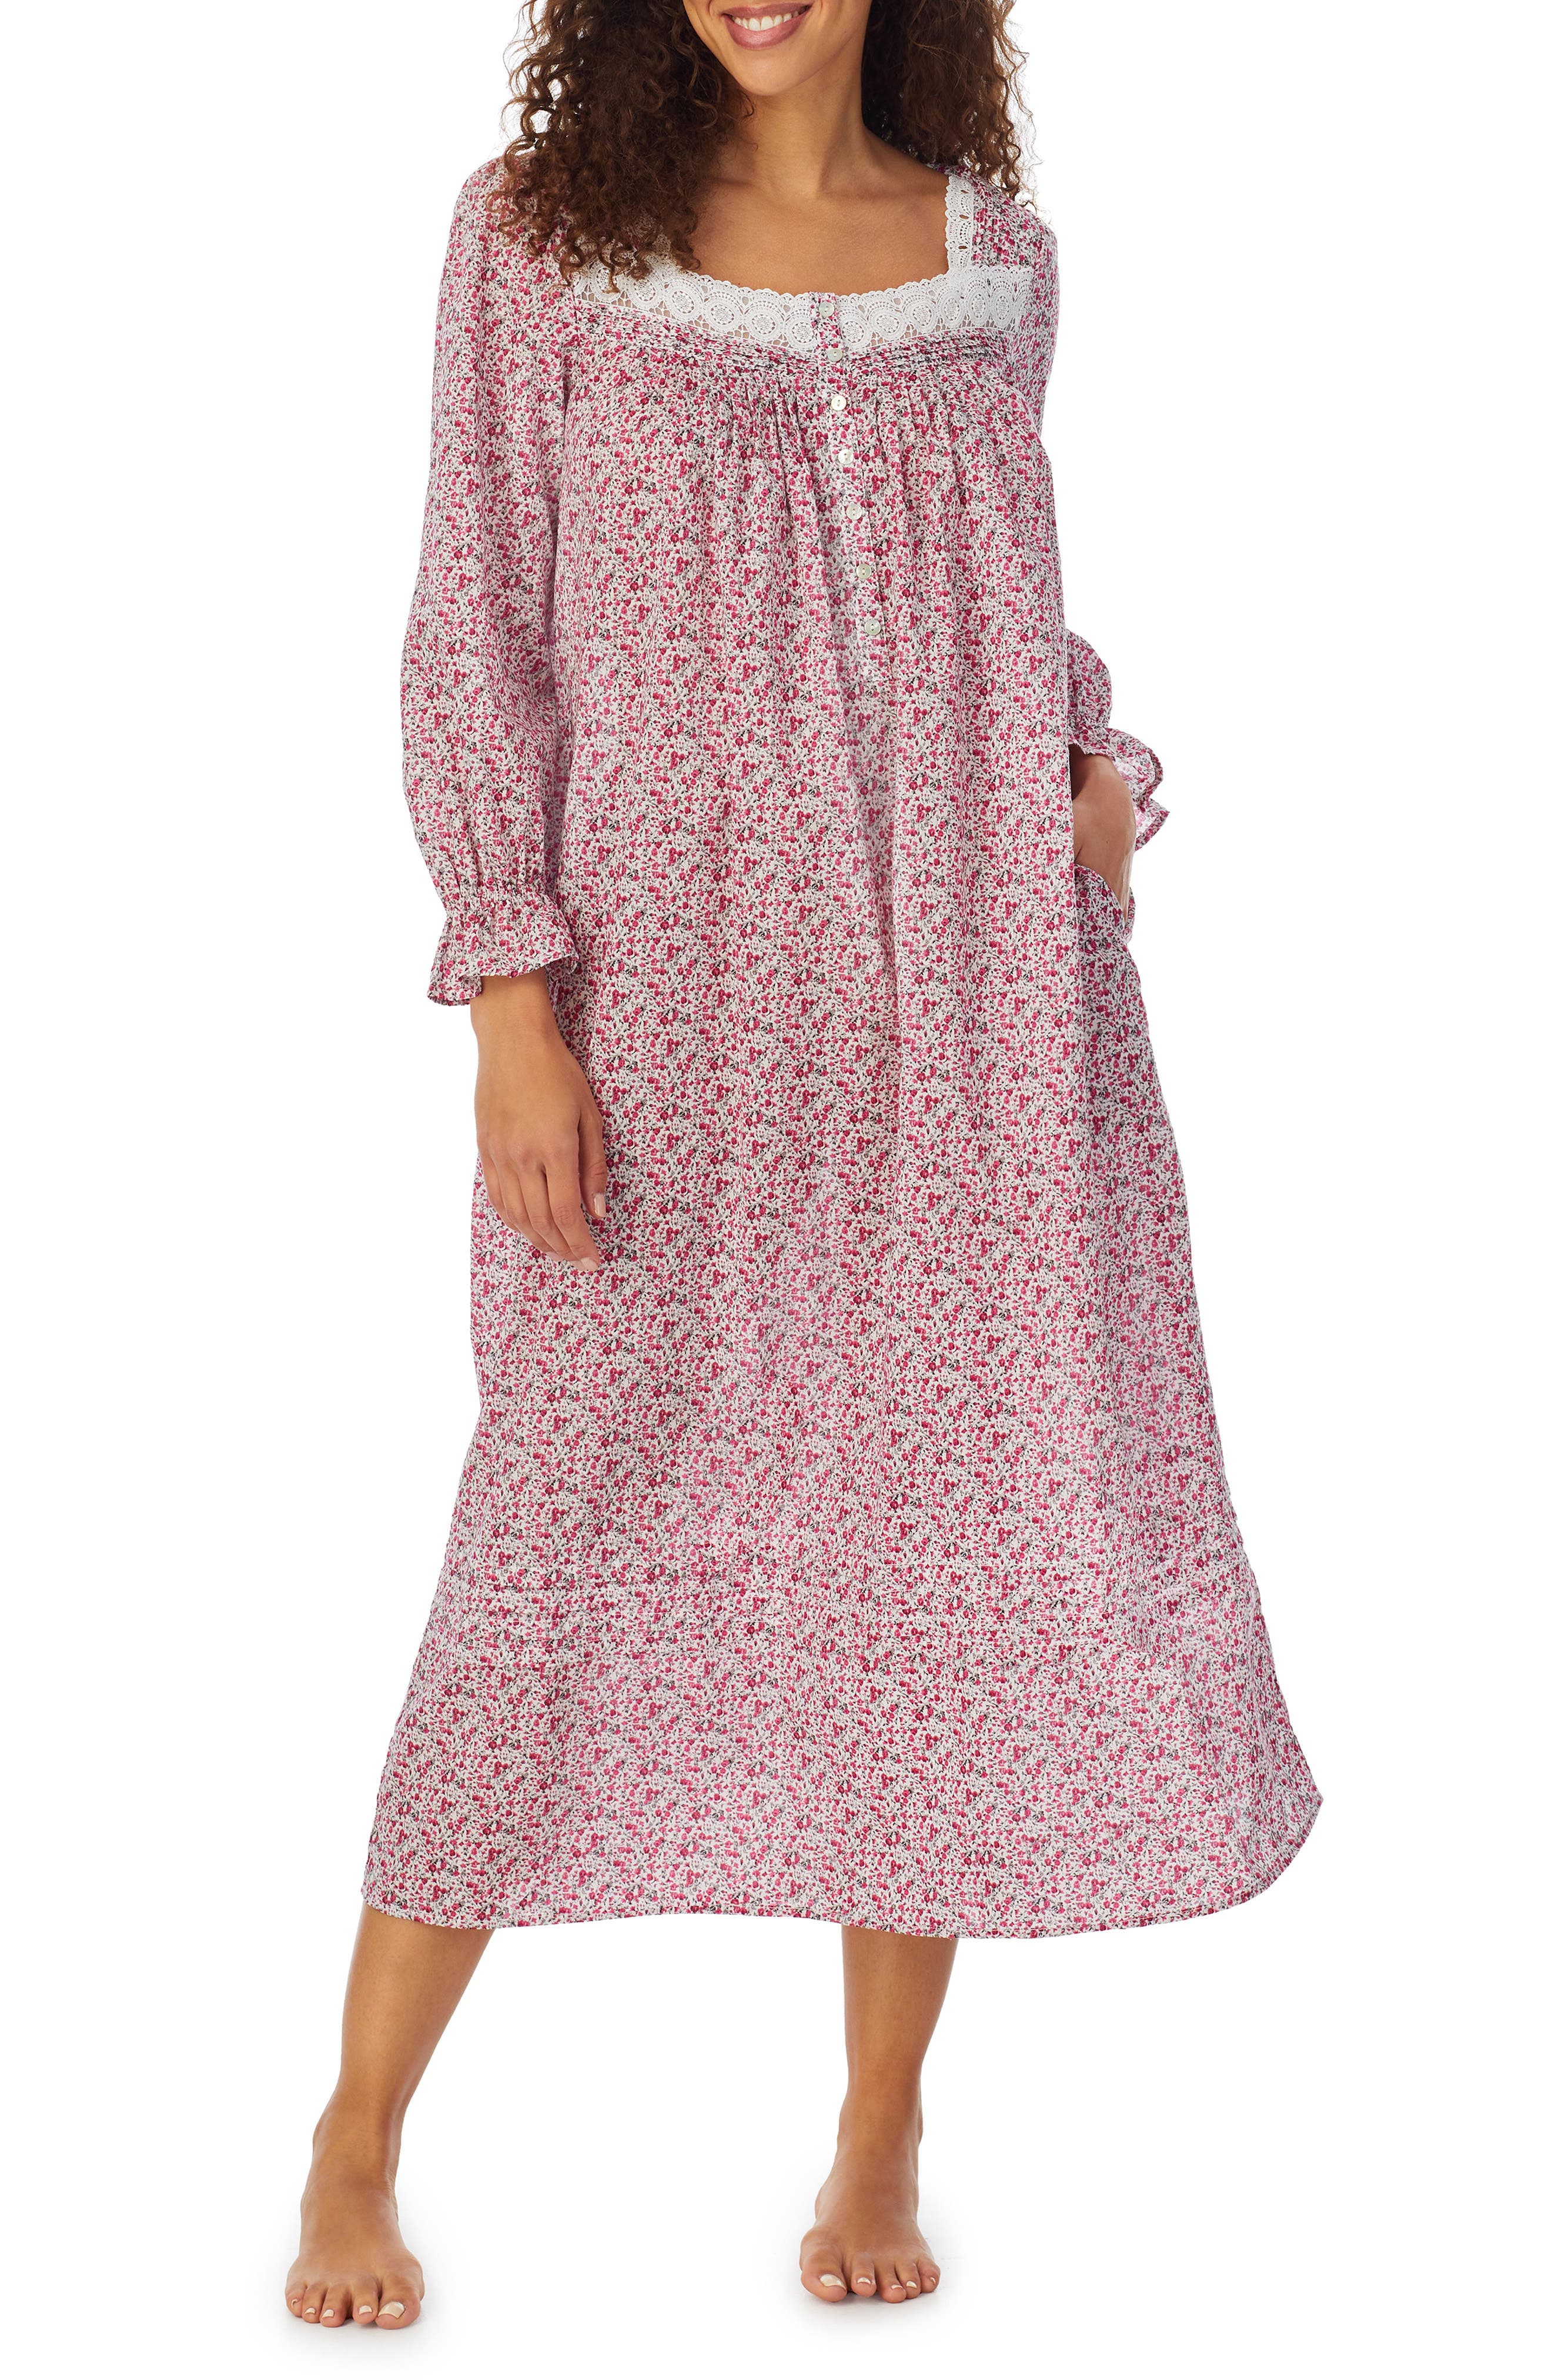 Ladies Cotton Blend Floral Print Lightweight knee Length Nightie Nightdress Size Clothing Womens Clothing Pyjamas & Robes Night Gowns & Tops 